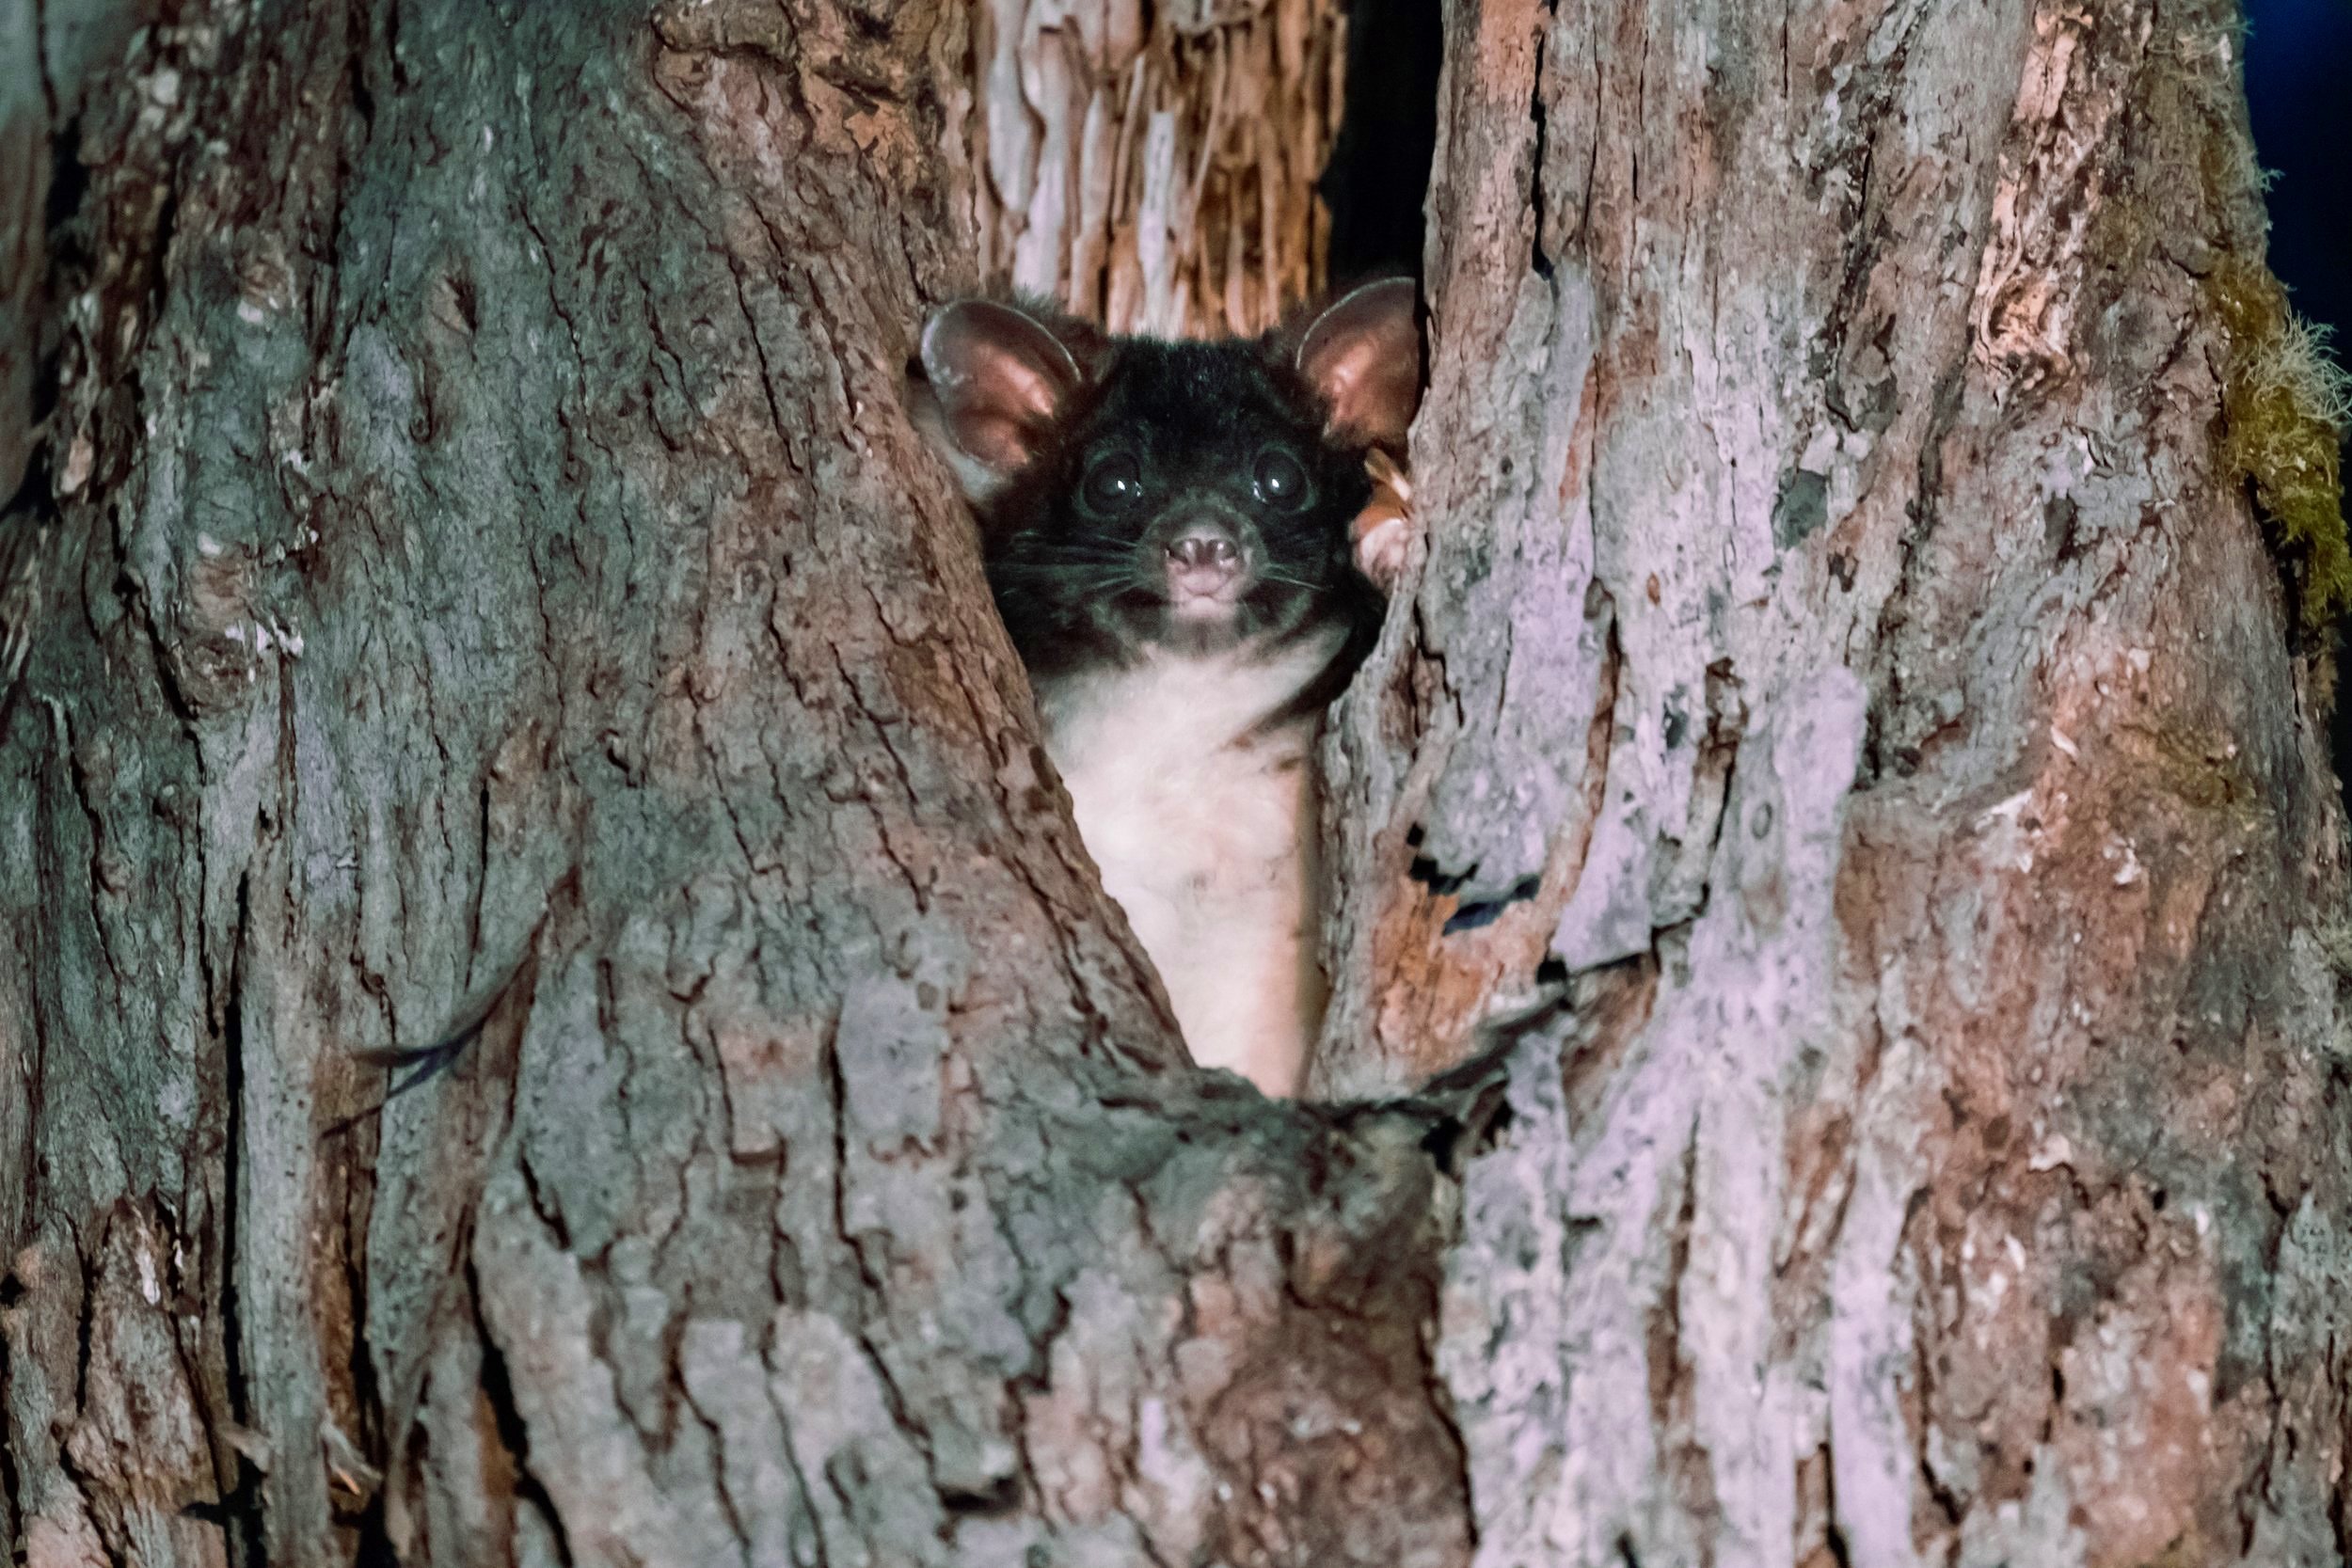  Juvenile Greater Glider peeking out from hollow - located in the Kangaroo Creek headwaters 